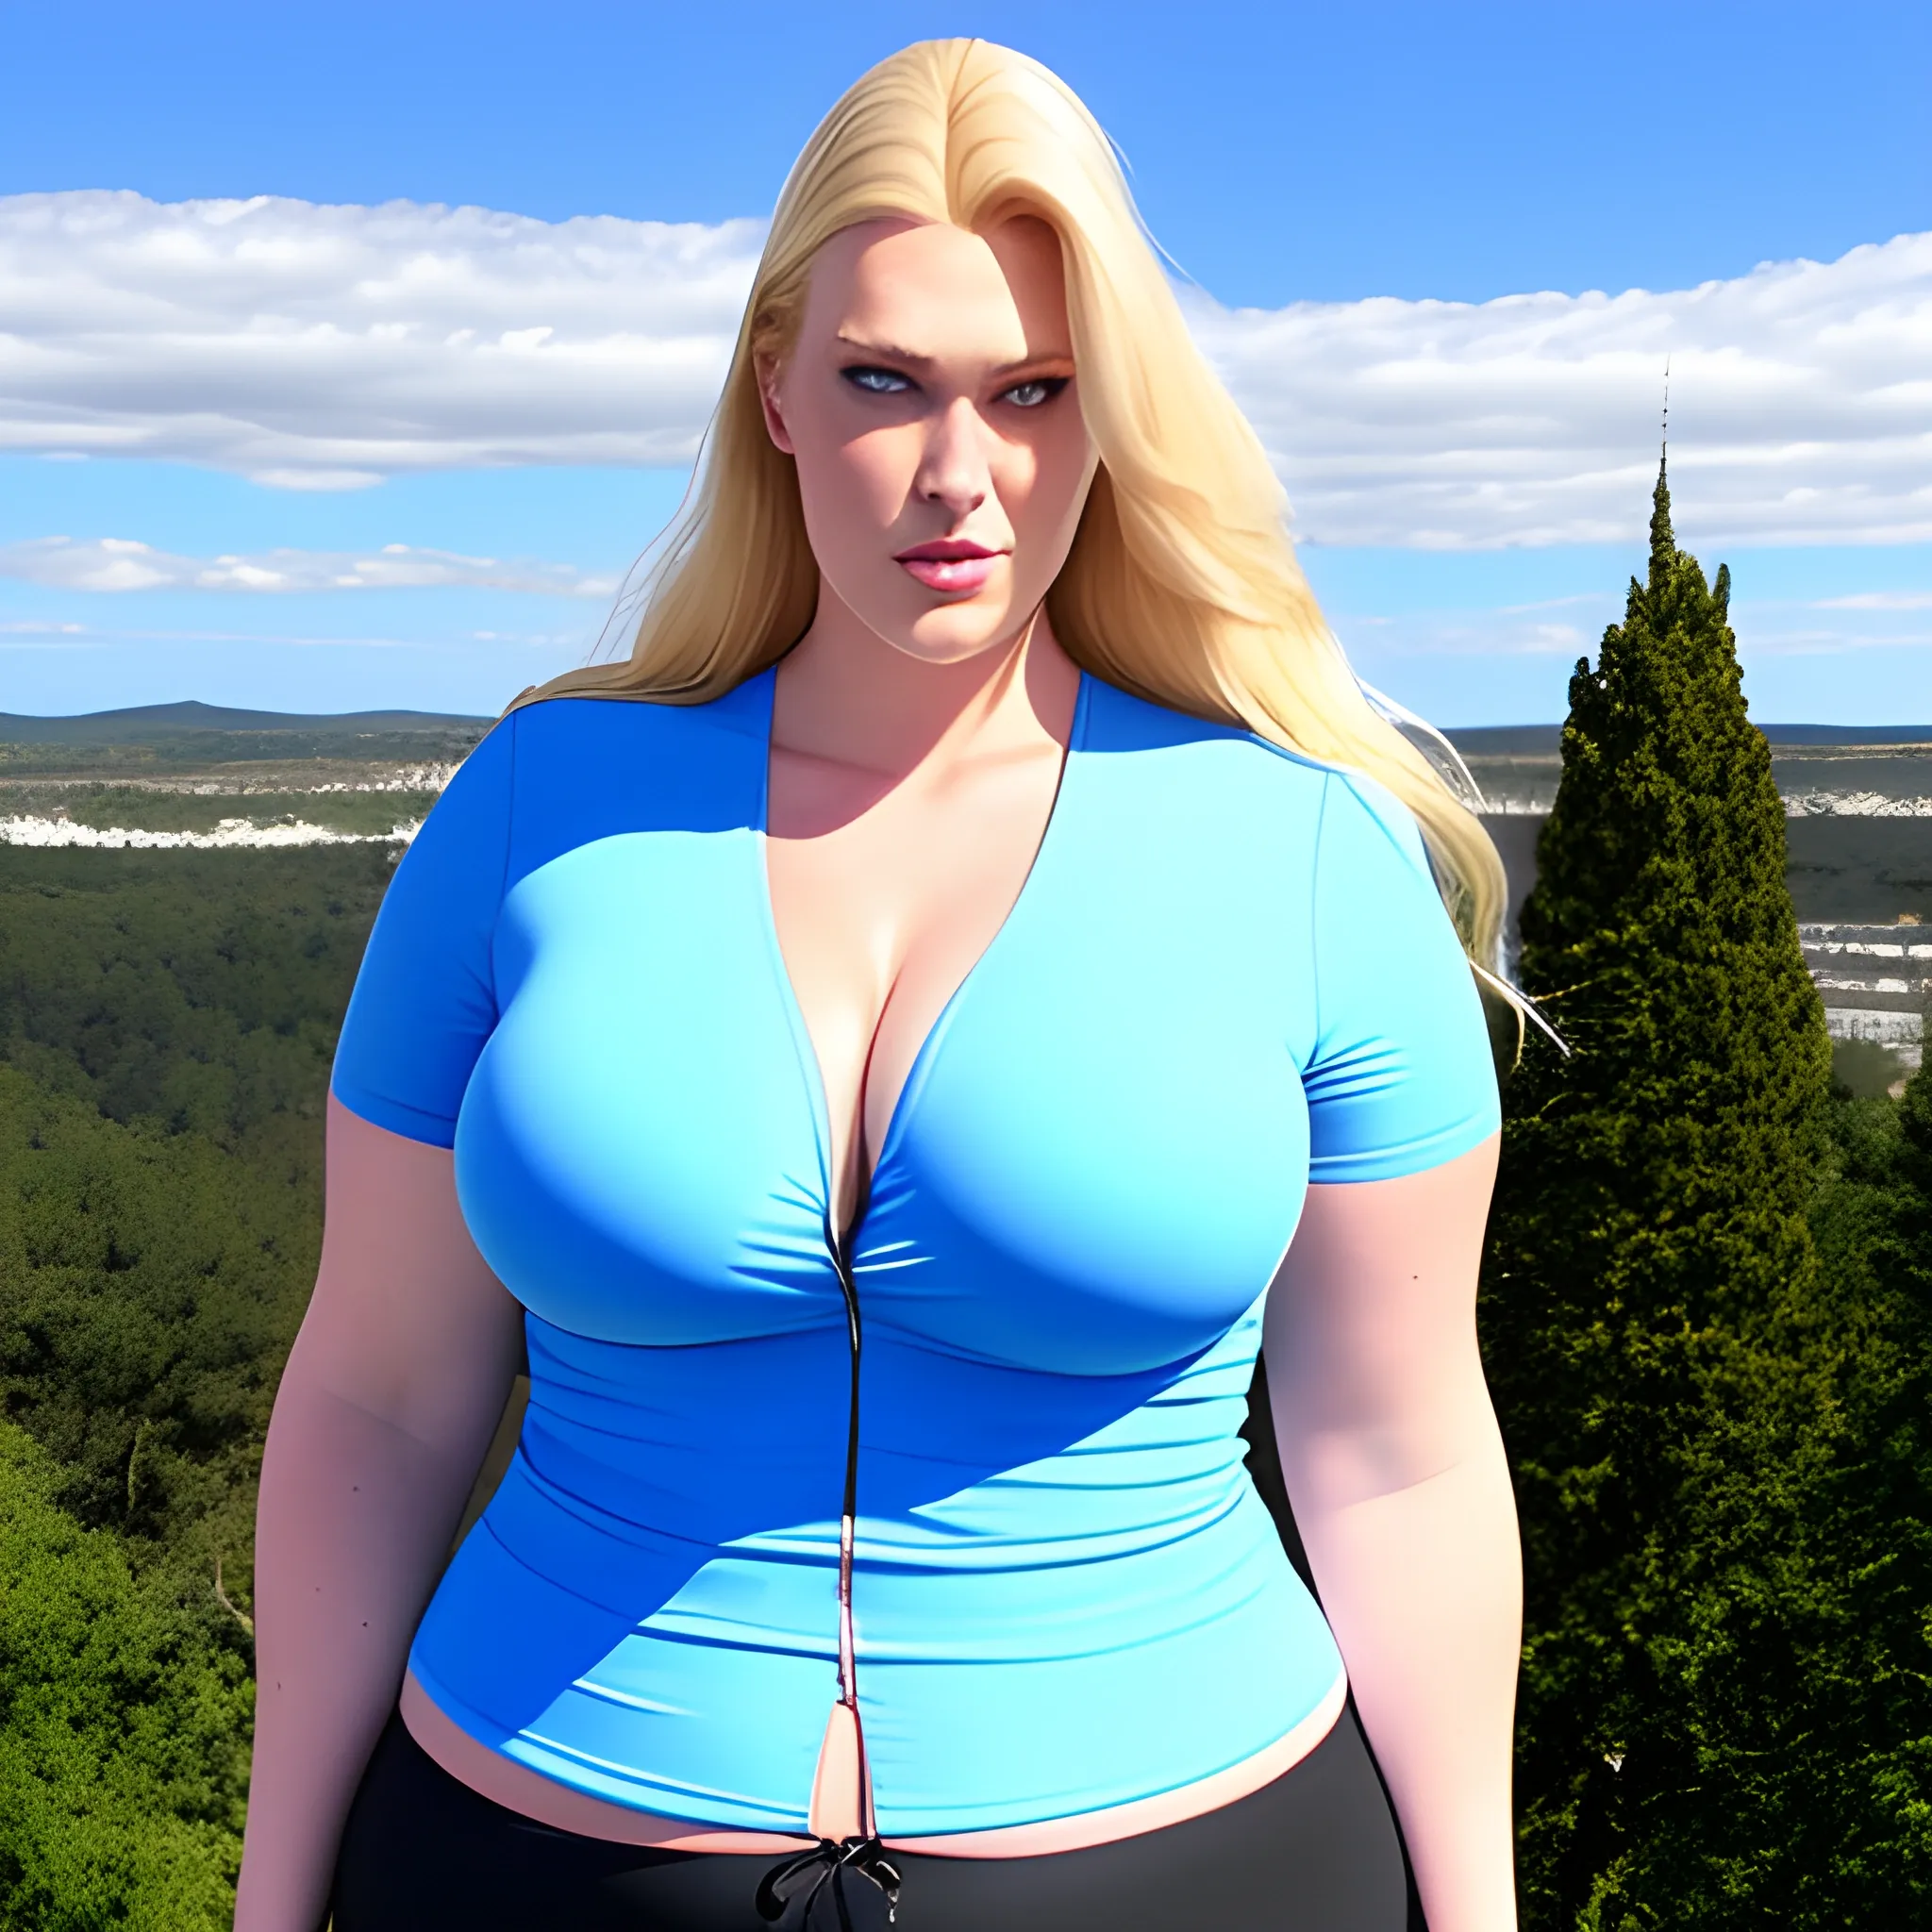 huge very tall plus size blonde very young girl with very small  